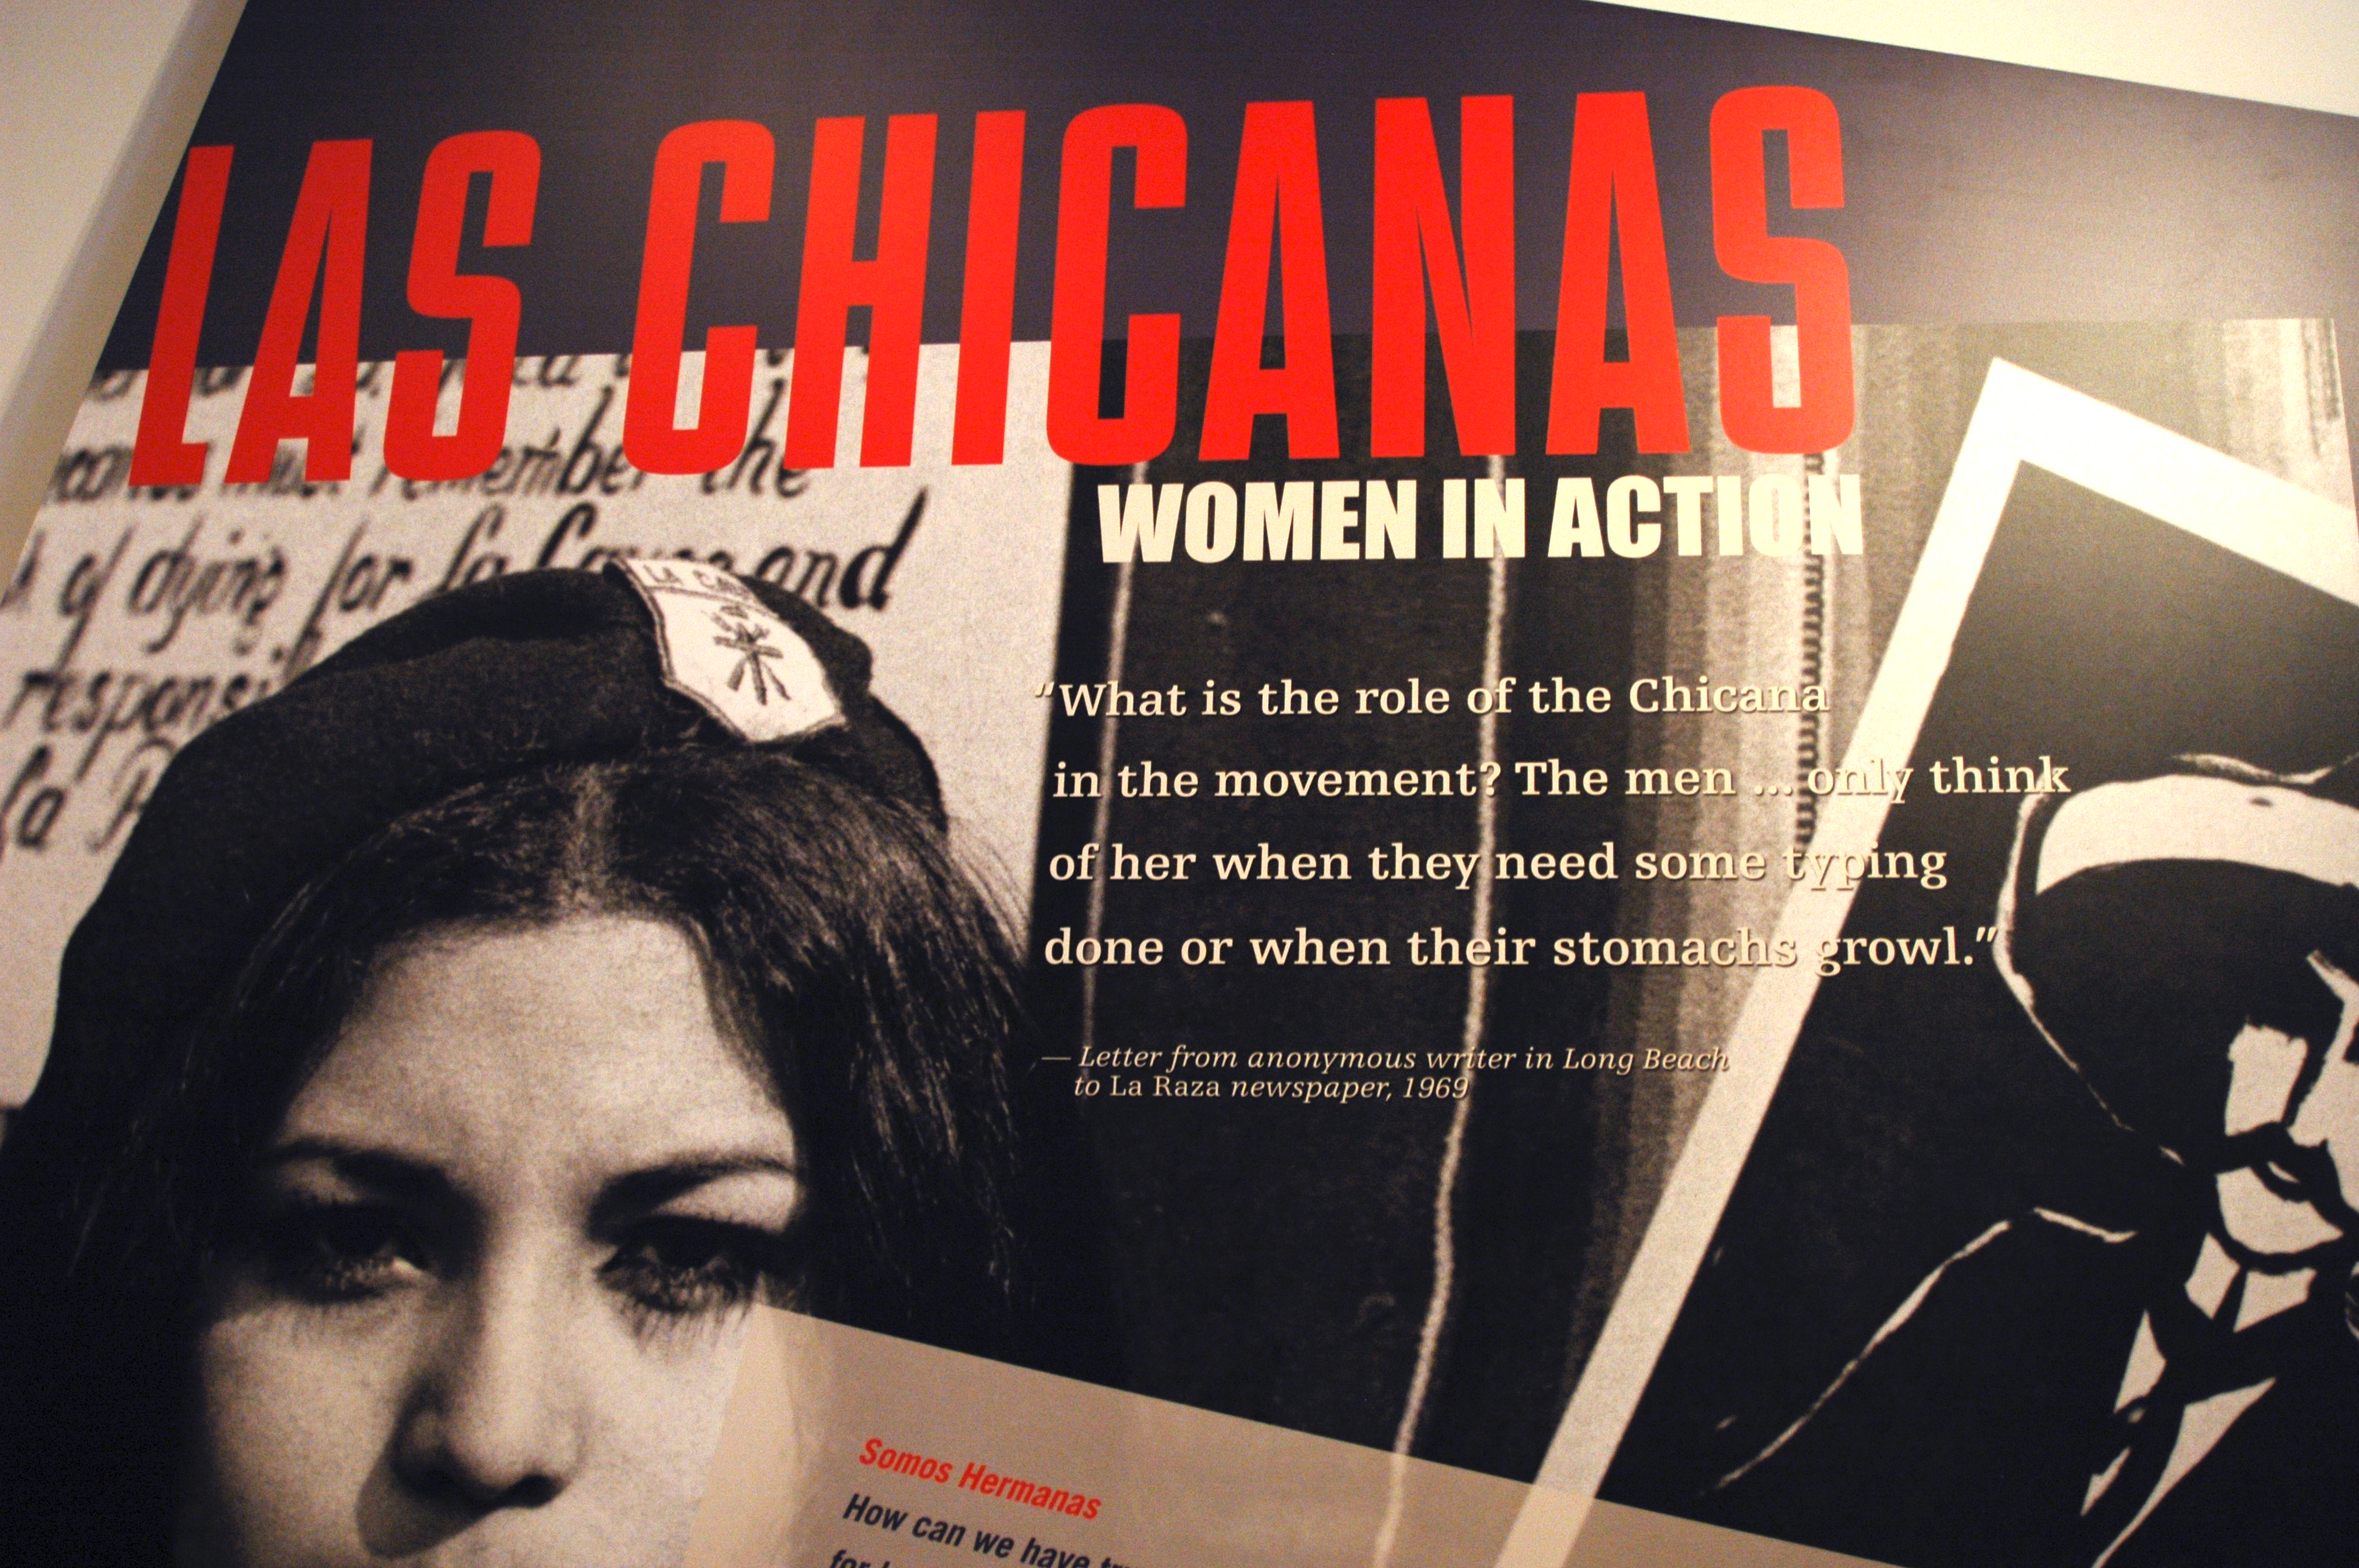 This is a poster reading “Las Chicanas: Women in Action” from LA Plaza de Cultura y Artes featuring an exhibit on Mexican American female activists.